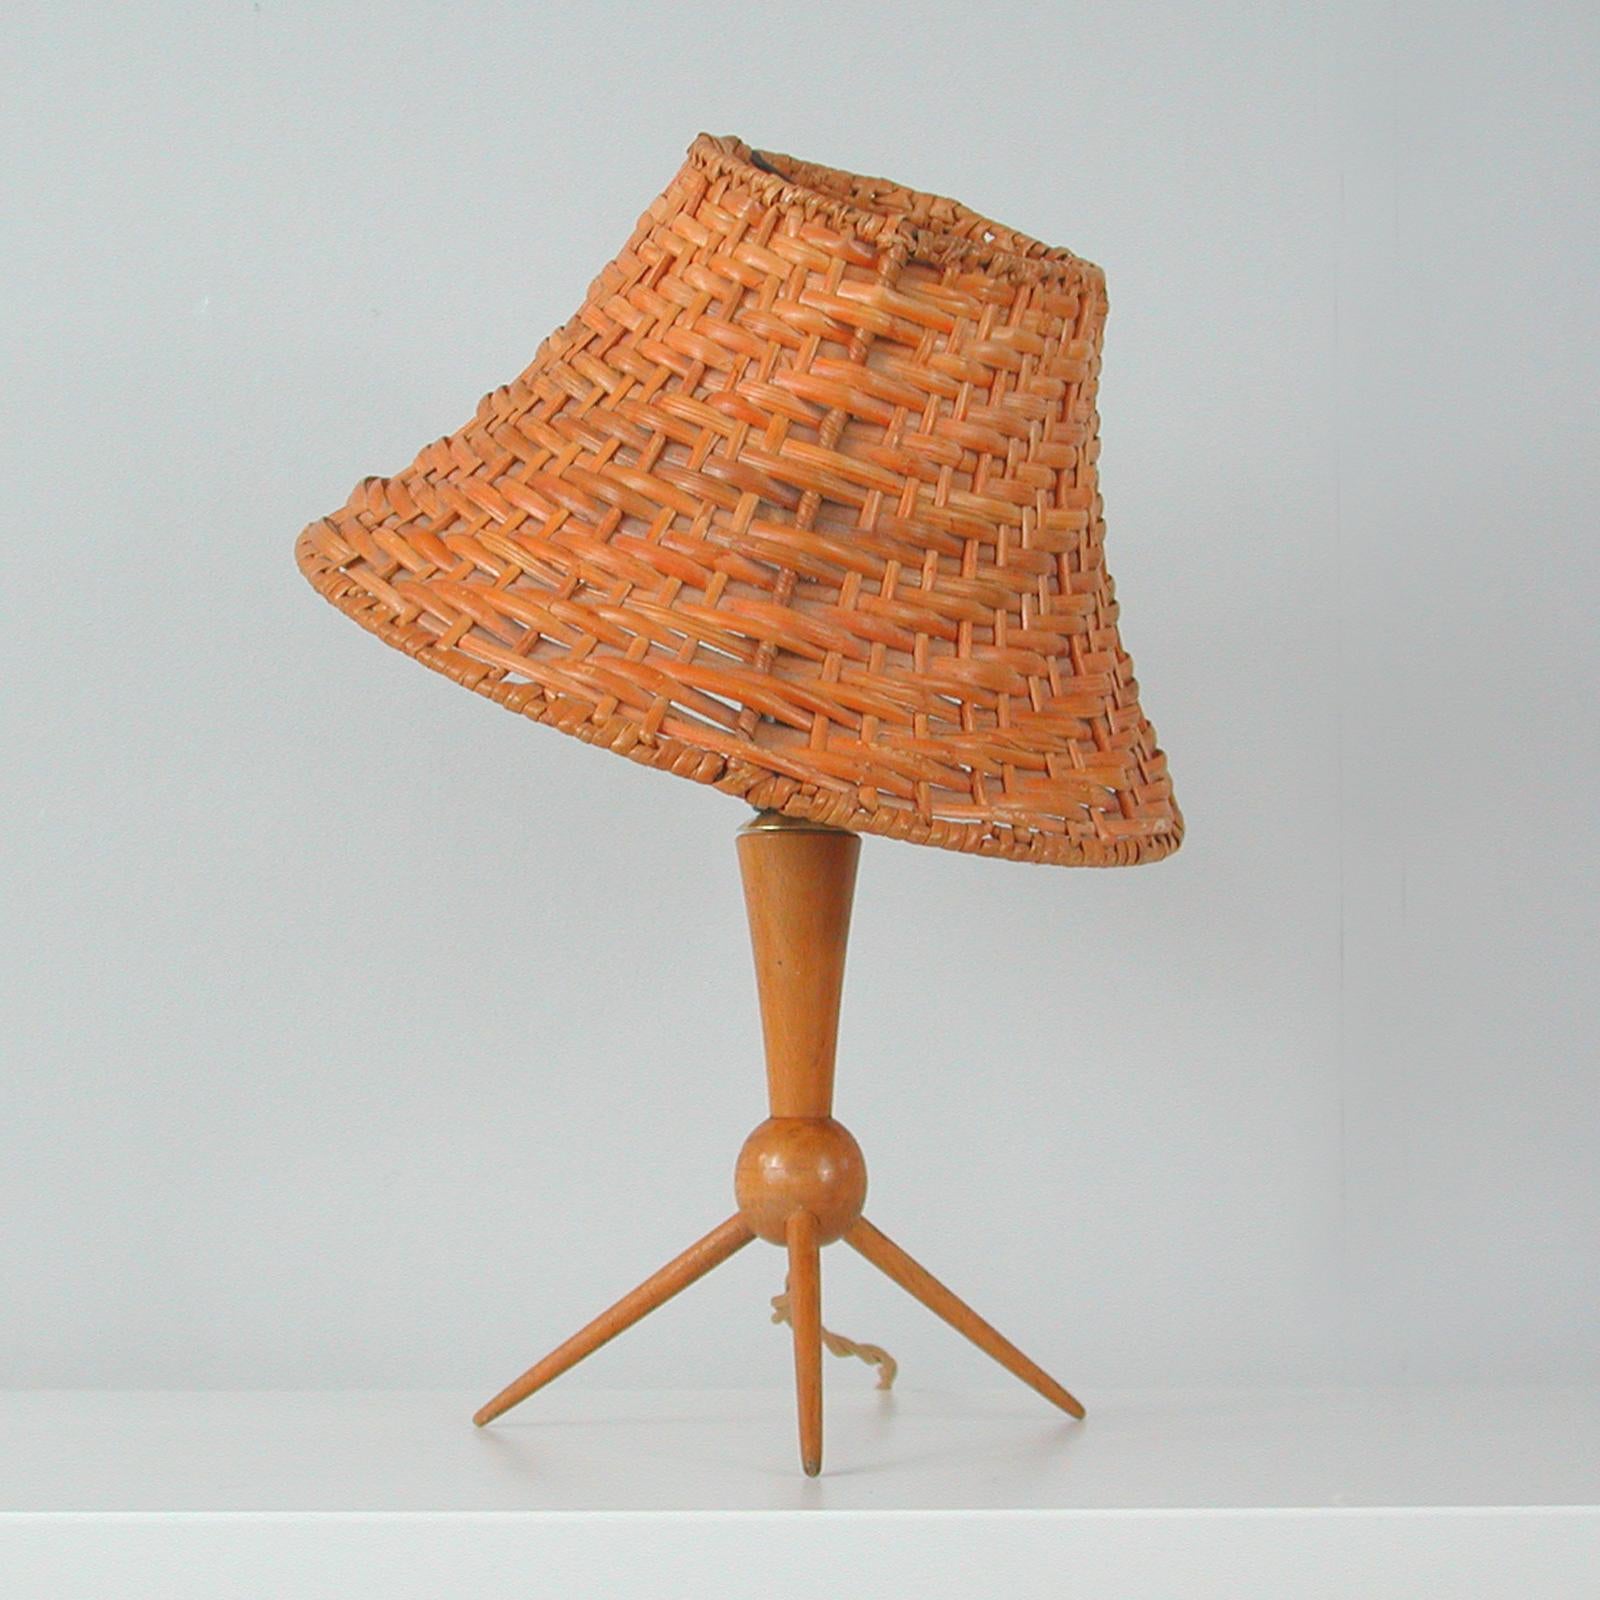 This unusual rattan or wicker table lamp was designed and manufactured in Sweden in the 1950s. It features a minimalist birch tripod base with a clip-on rattan lampshade. The lampshade can be moved in different directions.

Good original condition